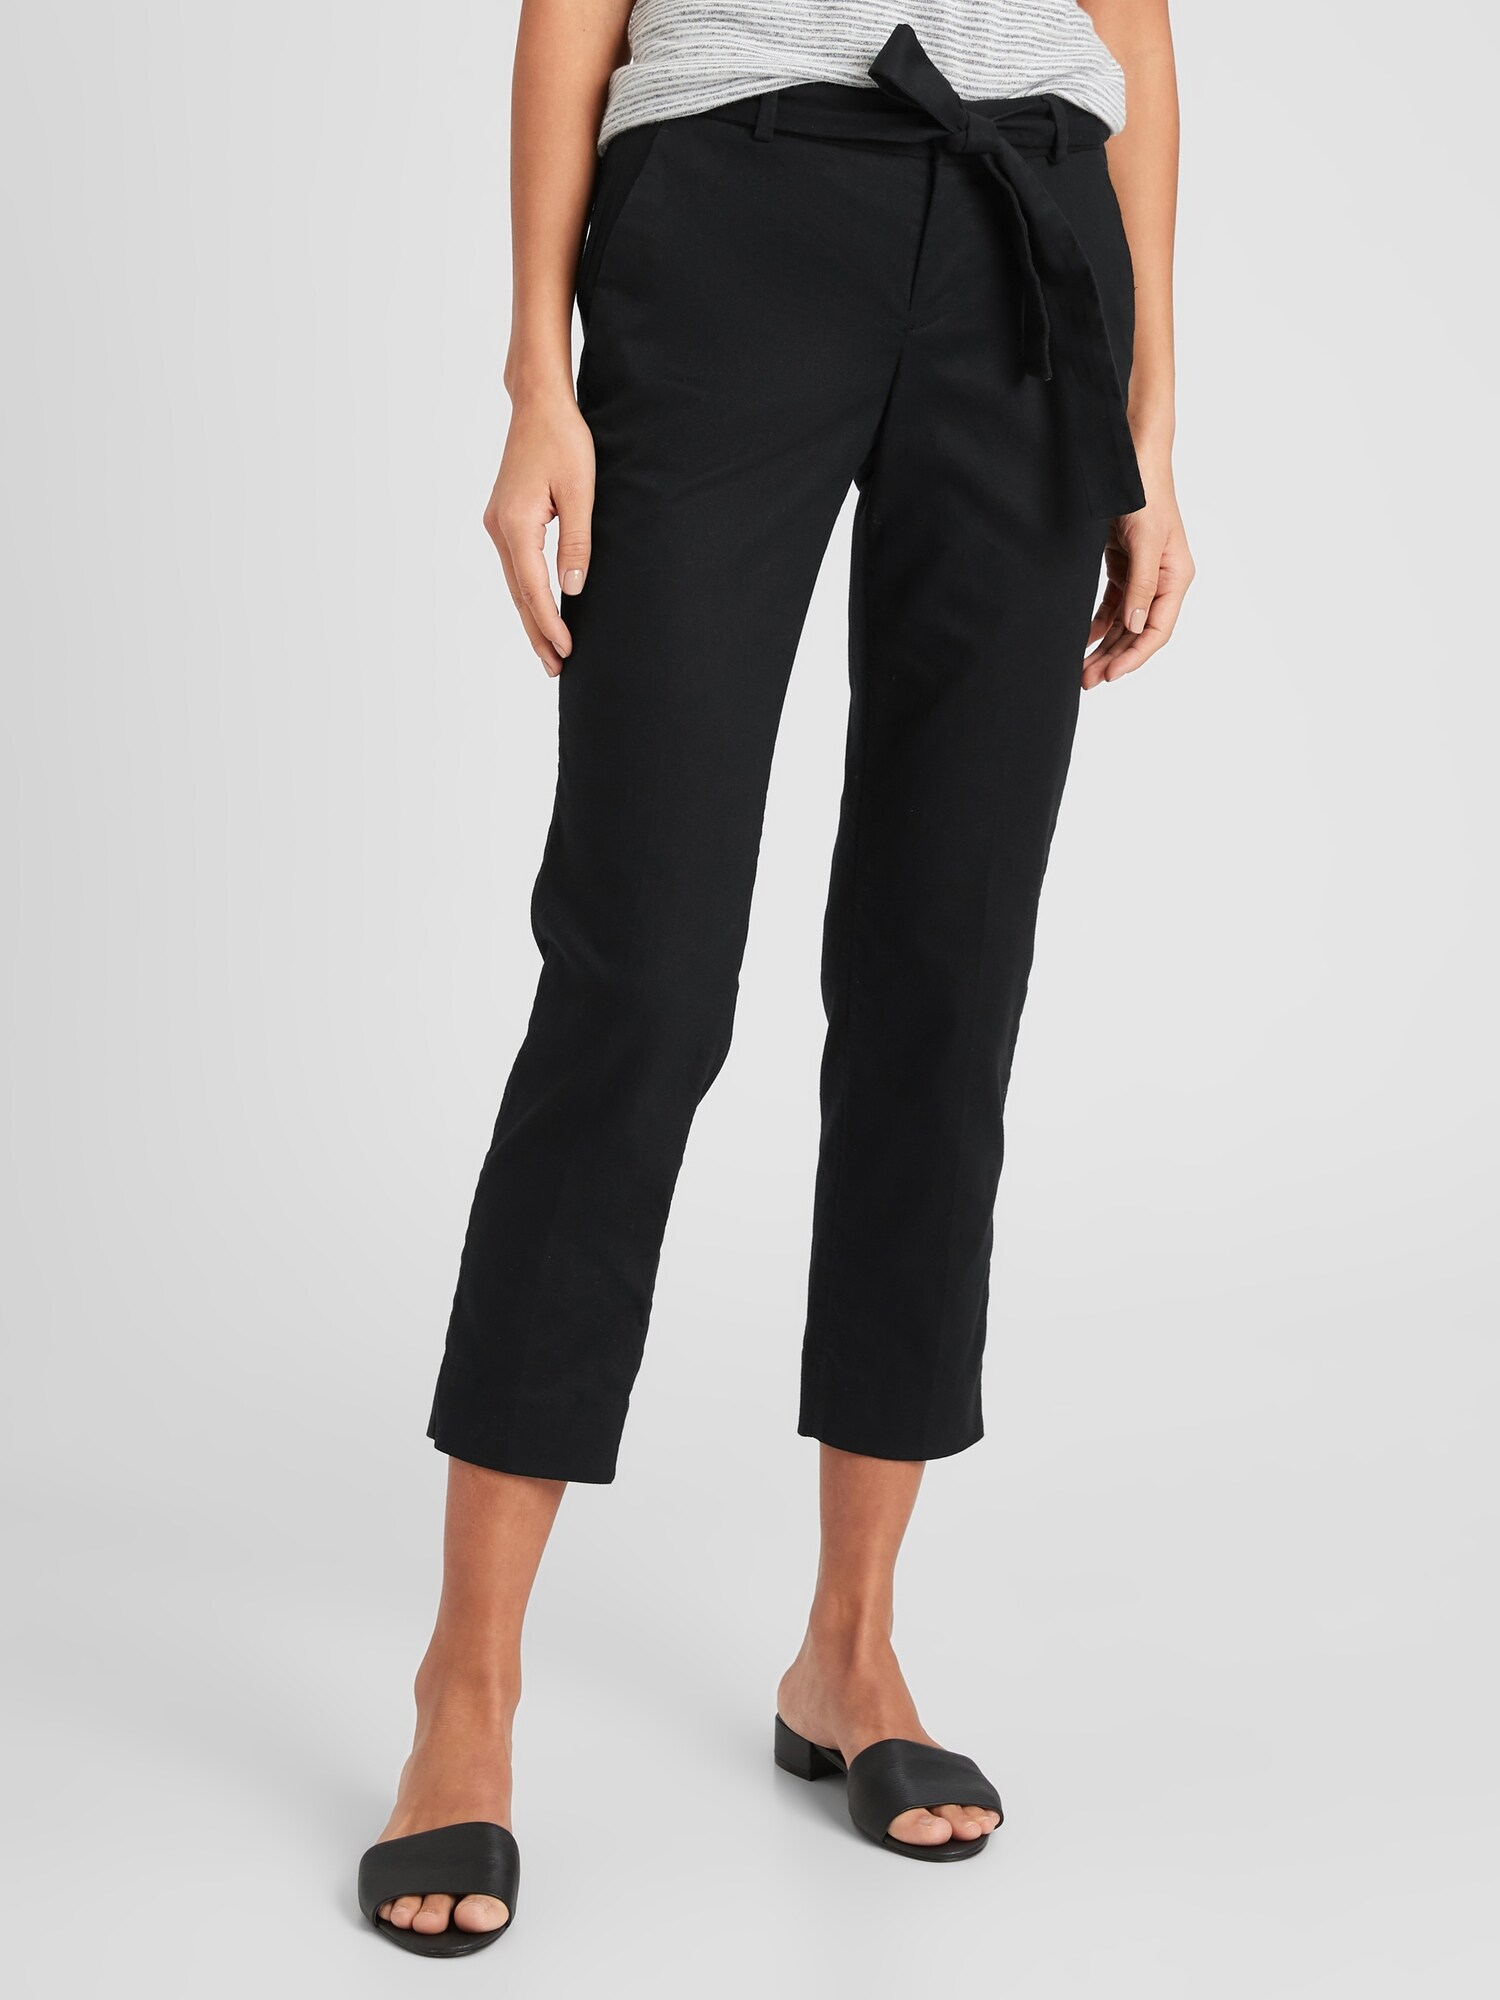 Avery Tie-Waist Linen Blend Tailored Ankle Pant